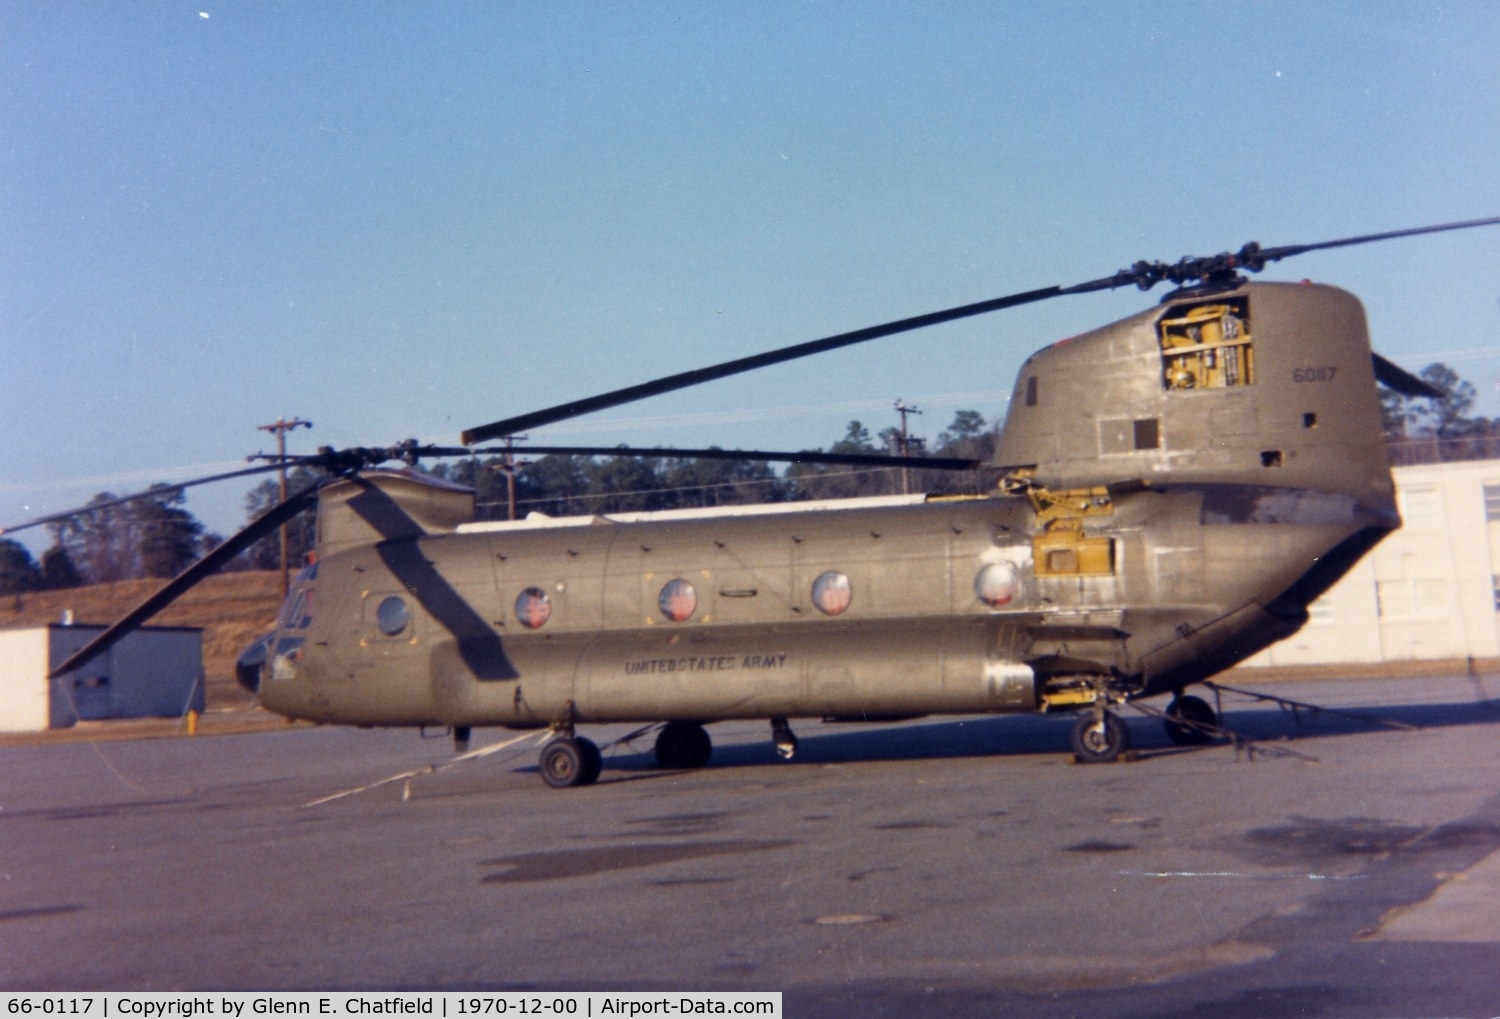 66-0117, 1966 Boeing Vertol CH-47A Chinook C/N B.249, CH-47A at the maintenance ramp, Lawson Army Air Field, Ft. Benning.  It was transferred to the VNAF and captured by North Vietnam at the end of the war.